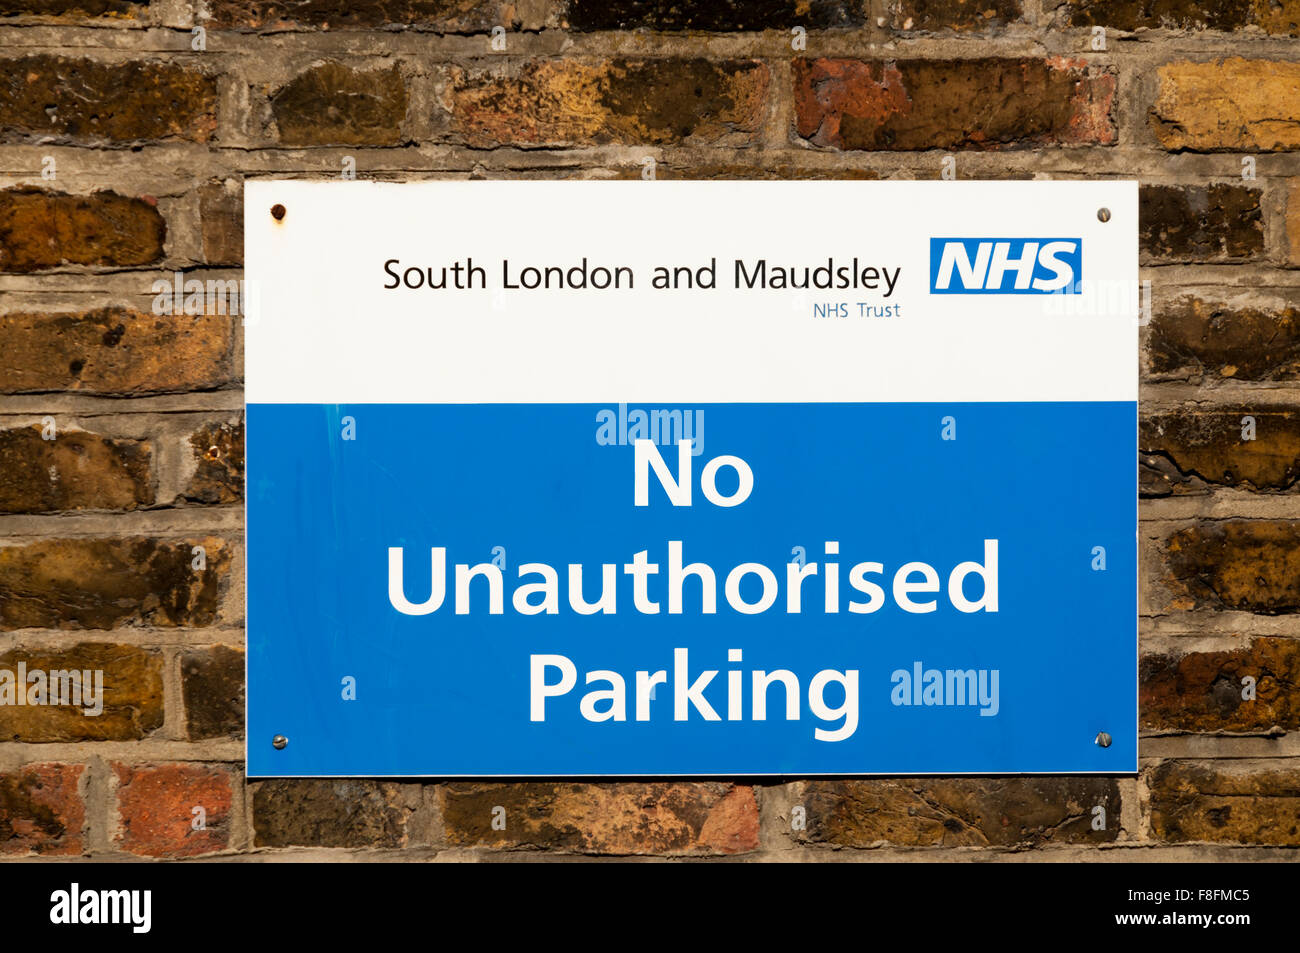 South London and Maudsley NHS Trus No Unauthorised Parking sign. Stock Photo